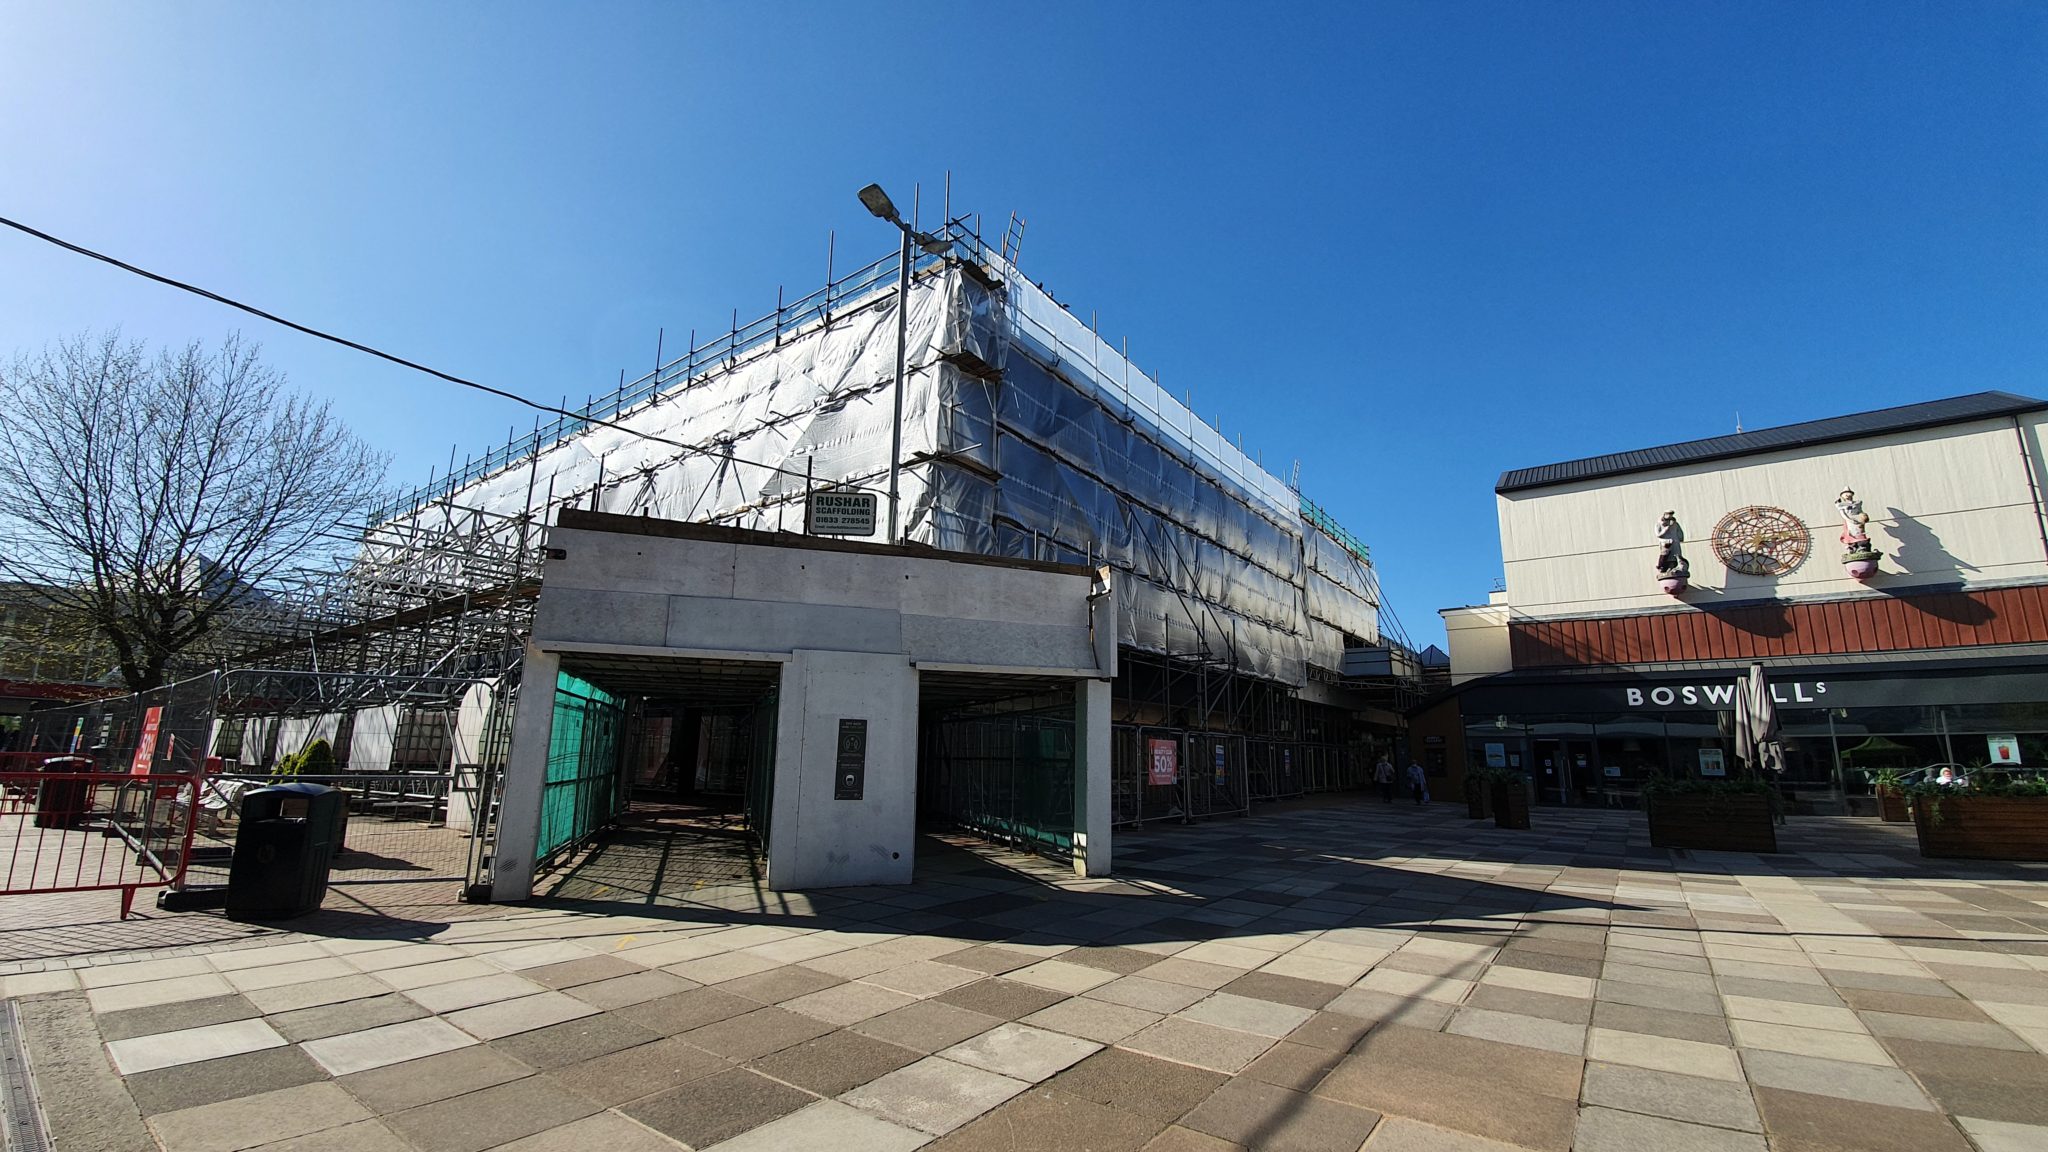 Scaffolding on House of Fraser in Cwmbran